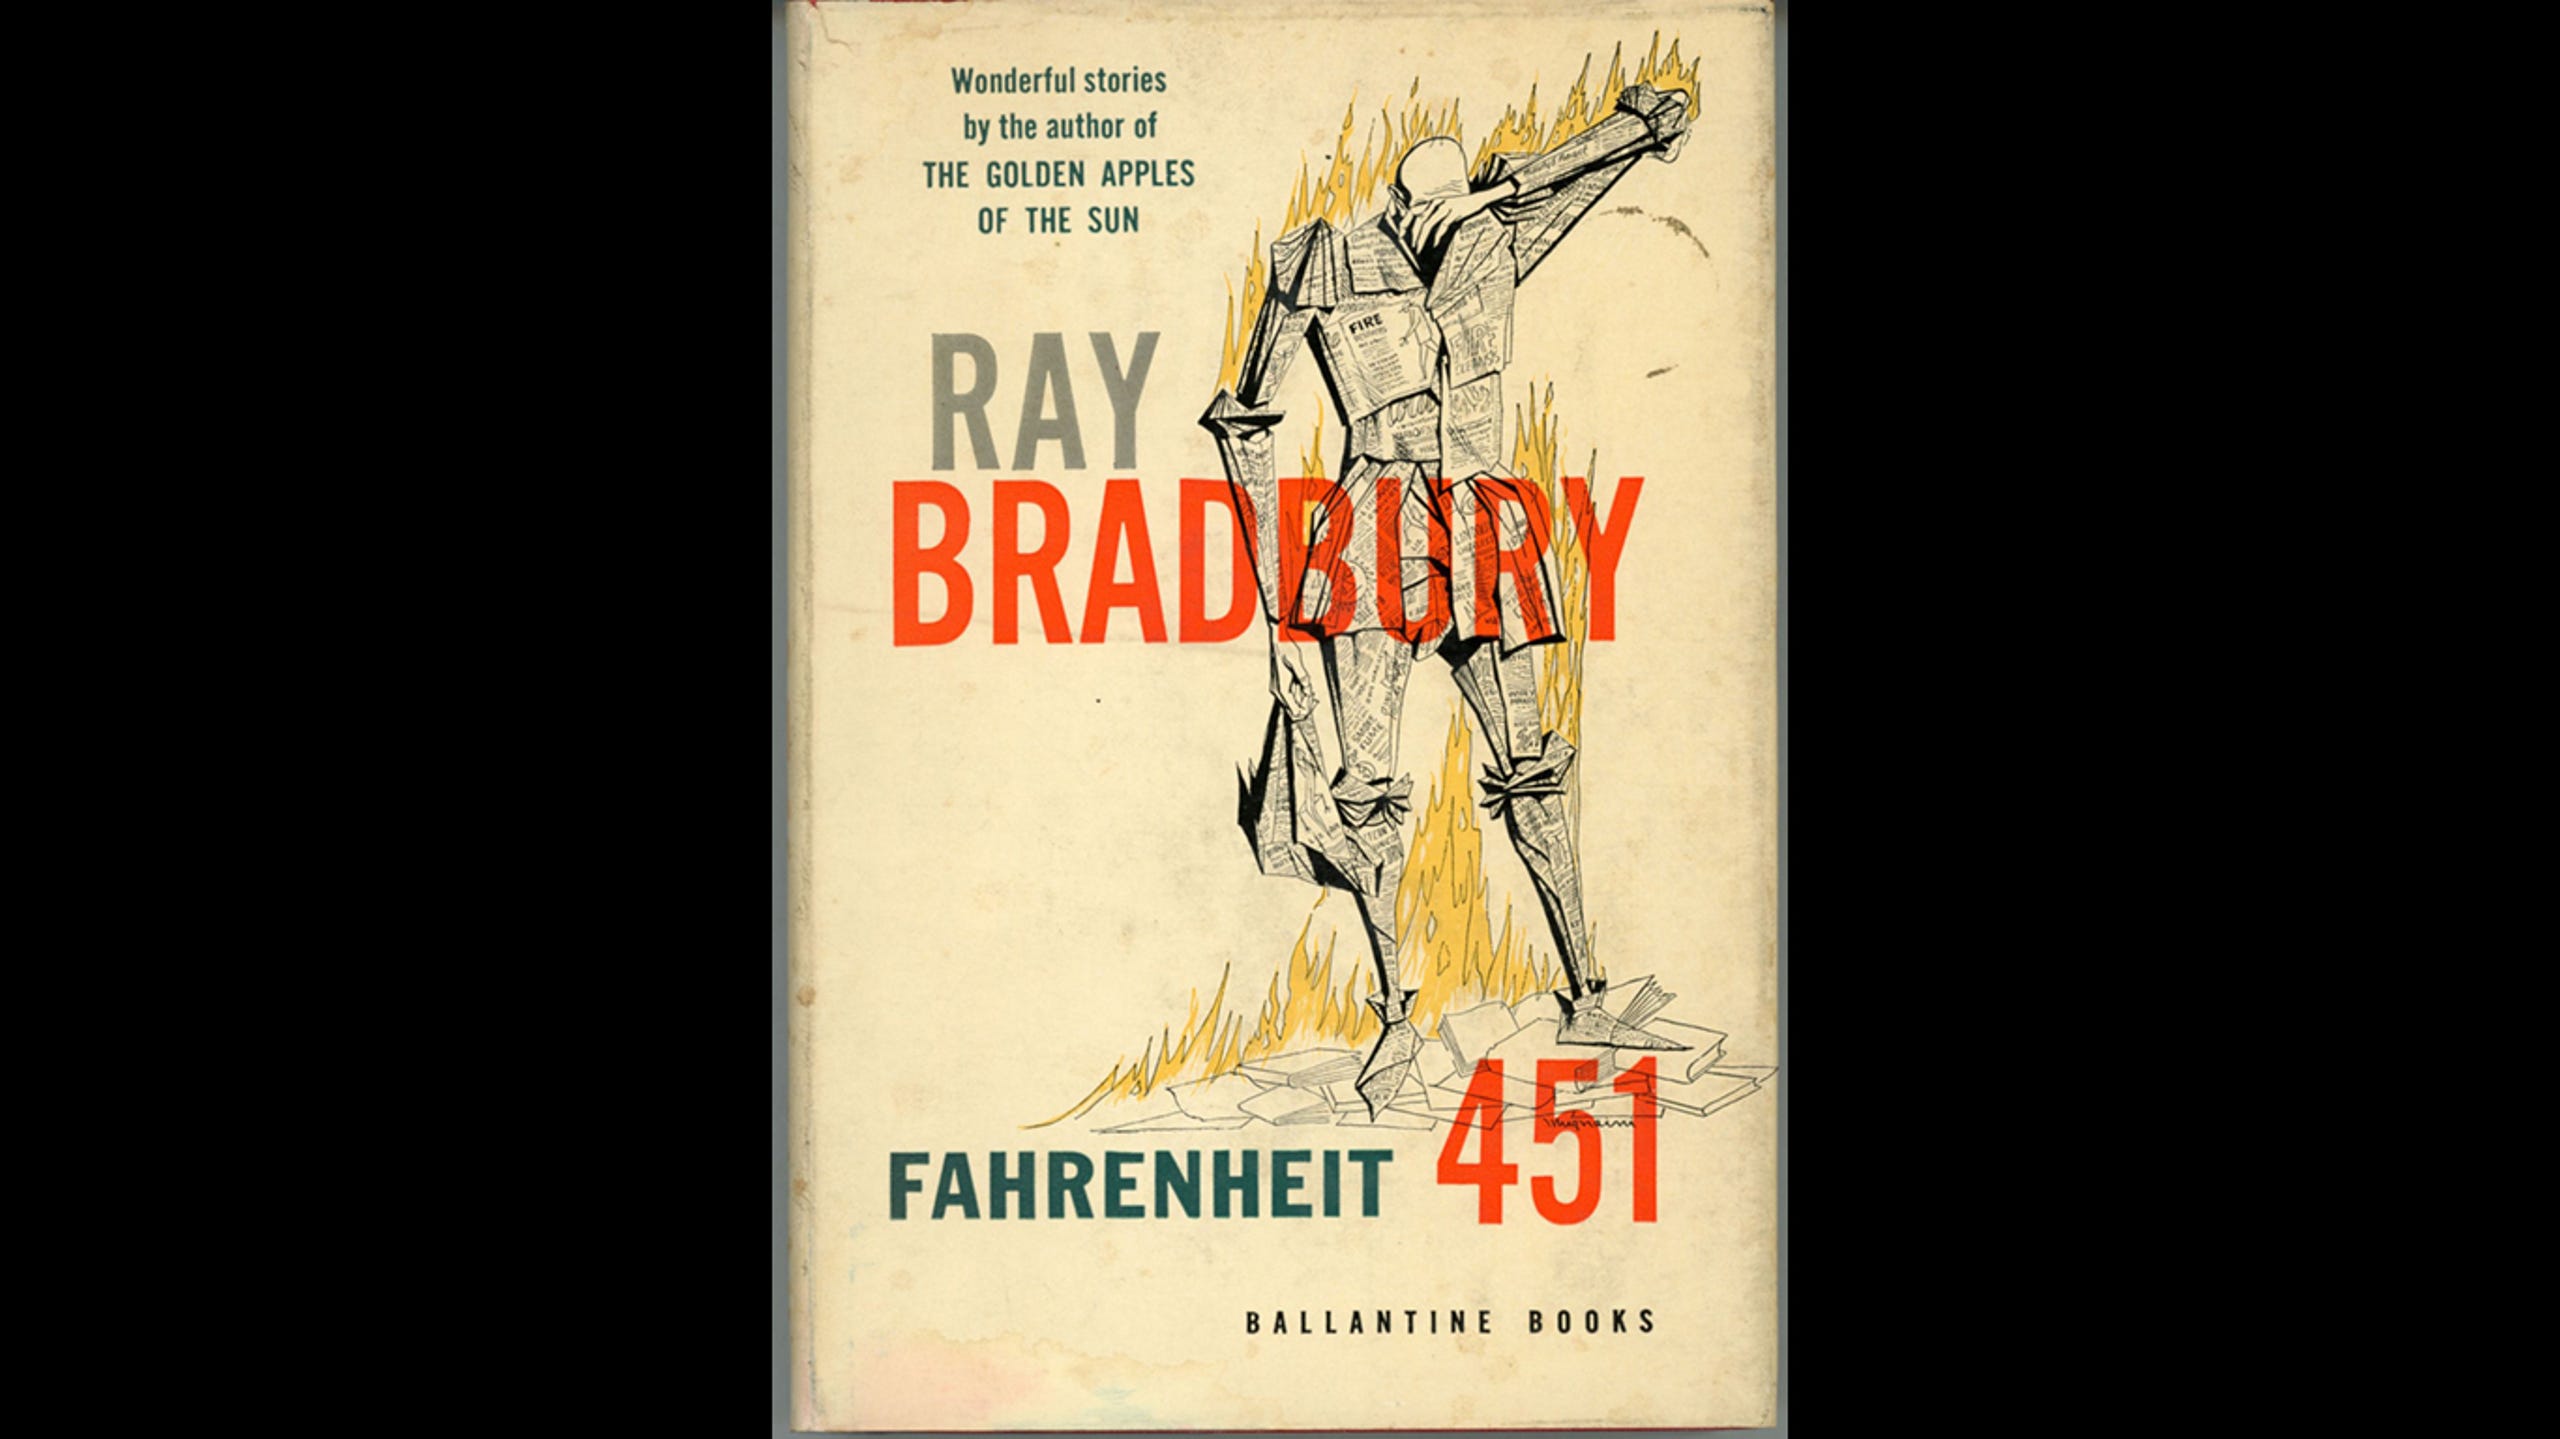 <strong>12. Fahrenheit 451 </strong><strong>• Author:</strong> Ray Bradbury <strong>• Originally published in:</strong> 1953 <strong>• </strong>"Fahrenheit 451" is a classic that should be on any list of classic books for the same reasons "1984" should be. "Fahrenheit 451," a staple of high school curricula, is a novel about an oppressive future and a dystopian society where books are illegal because of the government's fear of a thinking society. "This too is all too relevant today in its depiction of a not-too-distant-future government's attempts at mind-control, addressing also issues of censorship and the value of personal privacy, independent thinking and heroism in the face of evil mindless brutality," Uruburu said.